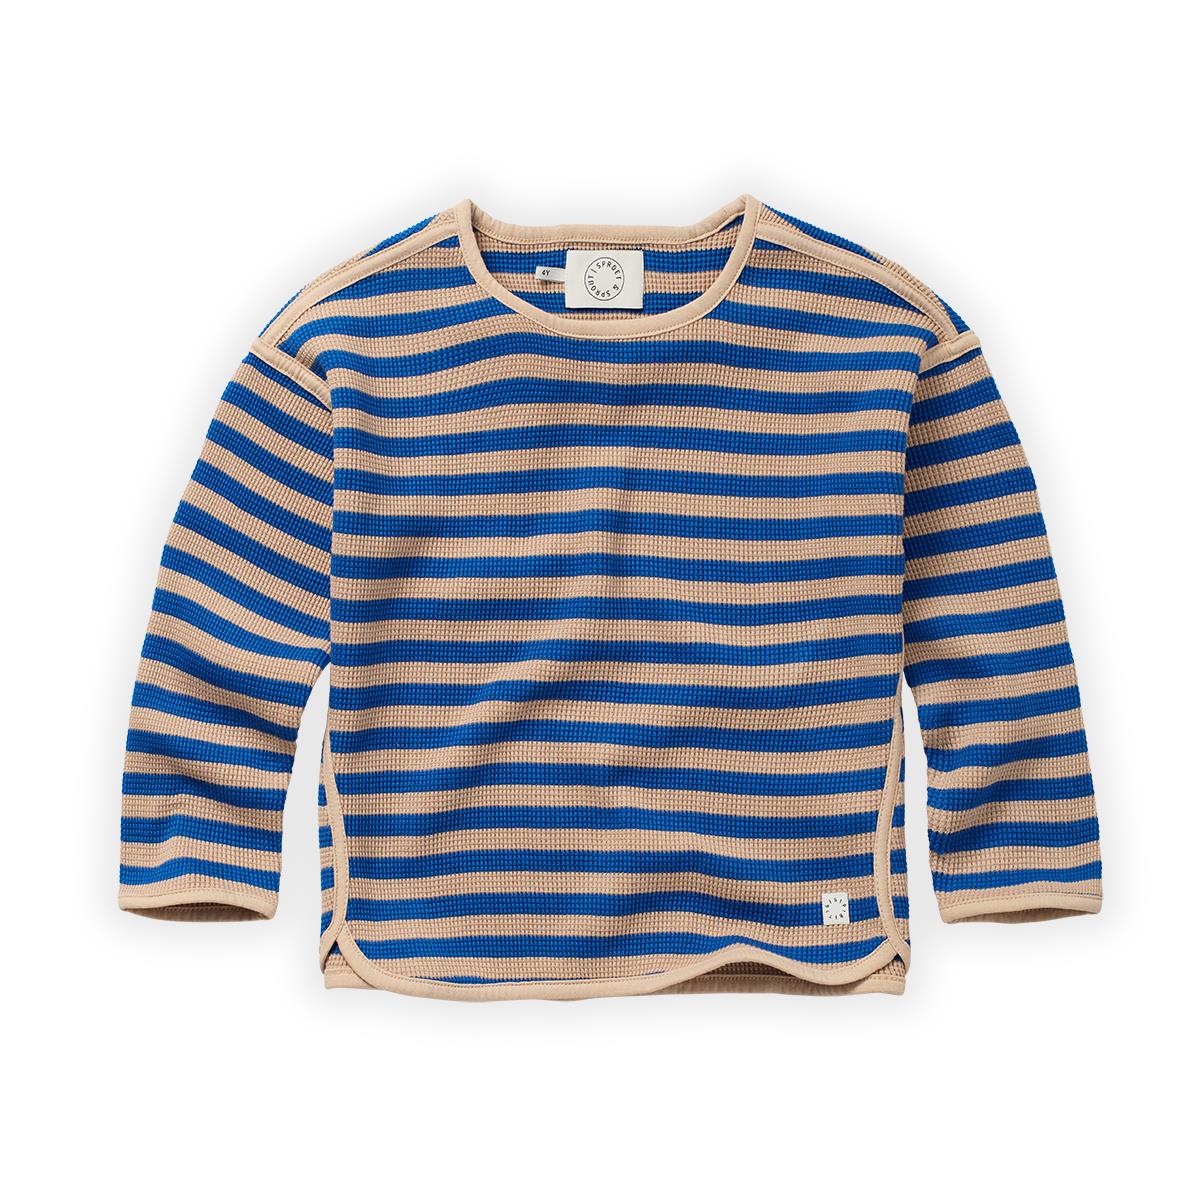 Sproet & Sprout - Sweatshirt knitted stripes